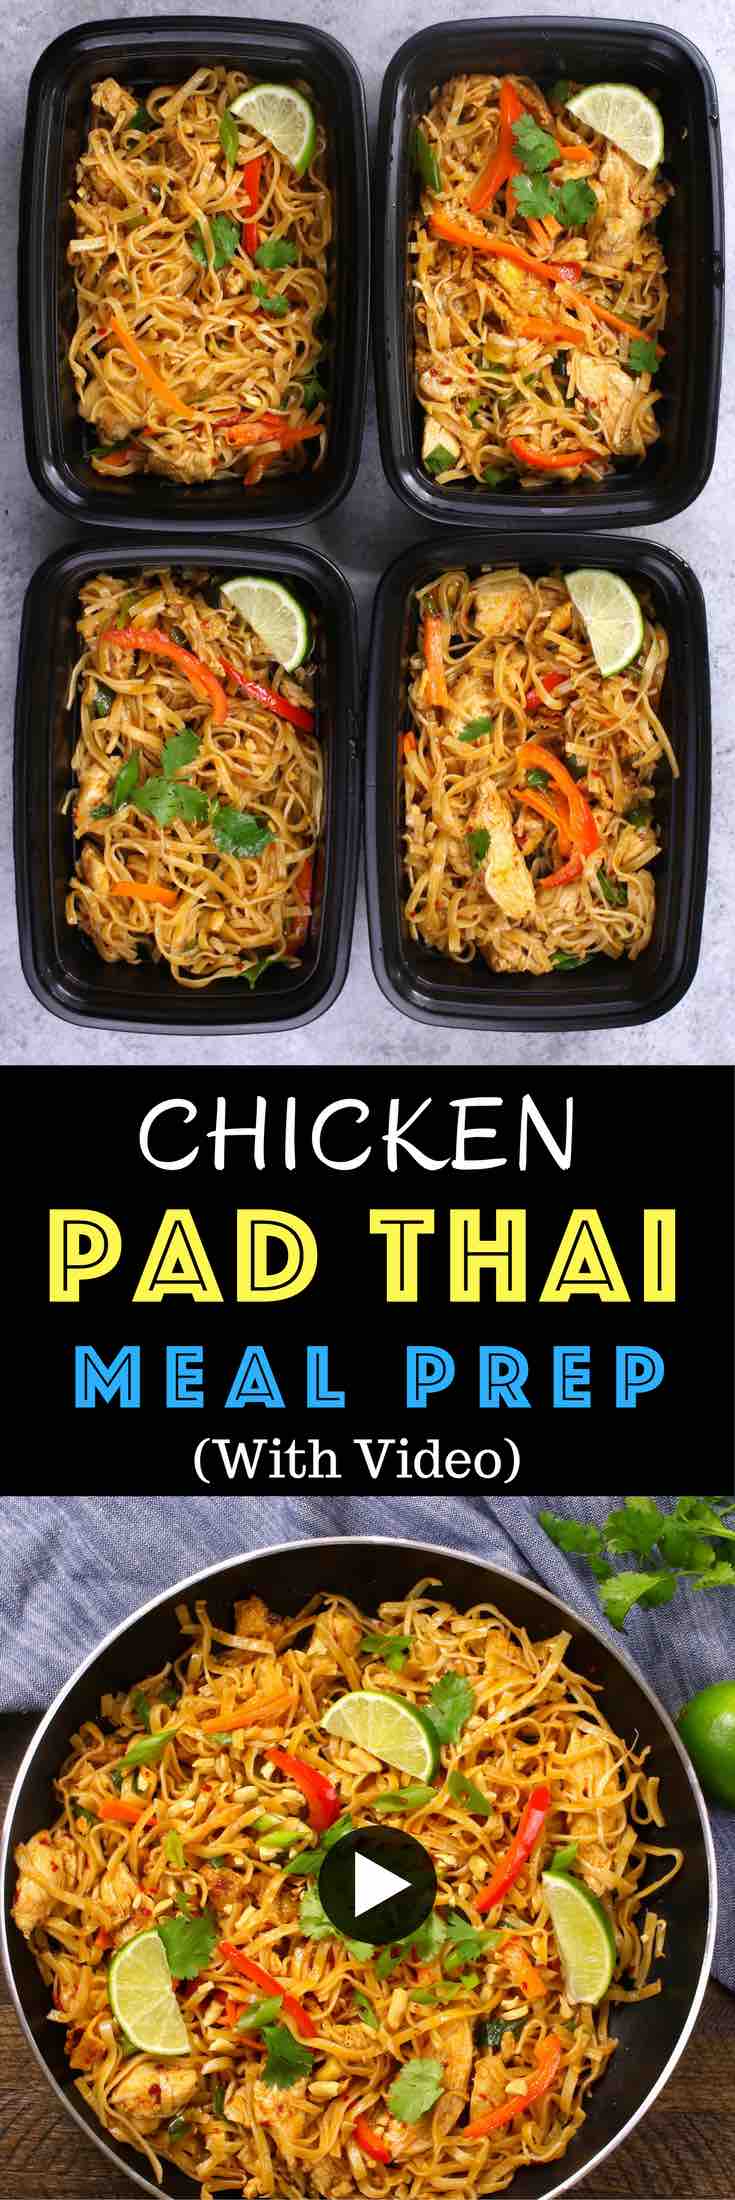 Save time and money when meal prep this authentic and delicious Chicken Pad Thai. In less than 30 minutes, you can cook dinner or lunch for the entire week! It’s so much better than take outs. Make ahead recipe. Video recipe. | Tipbuzz.com